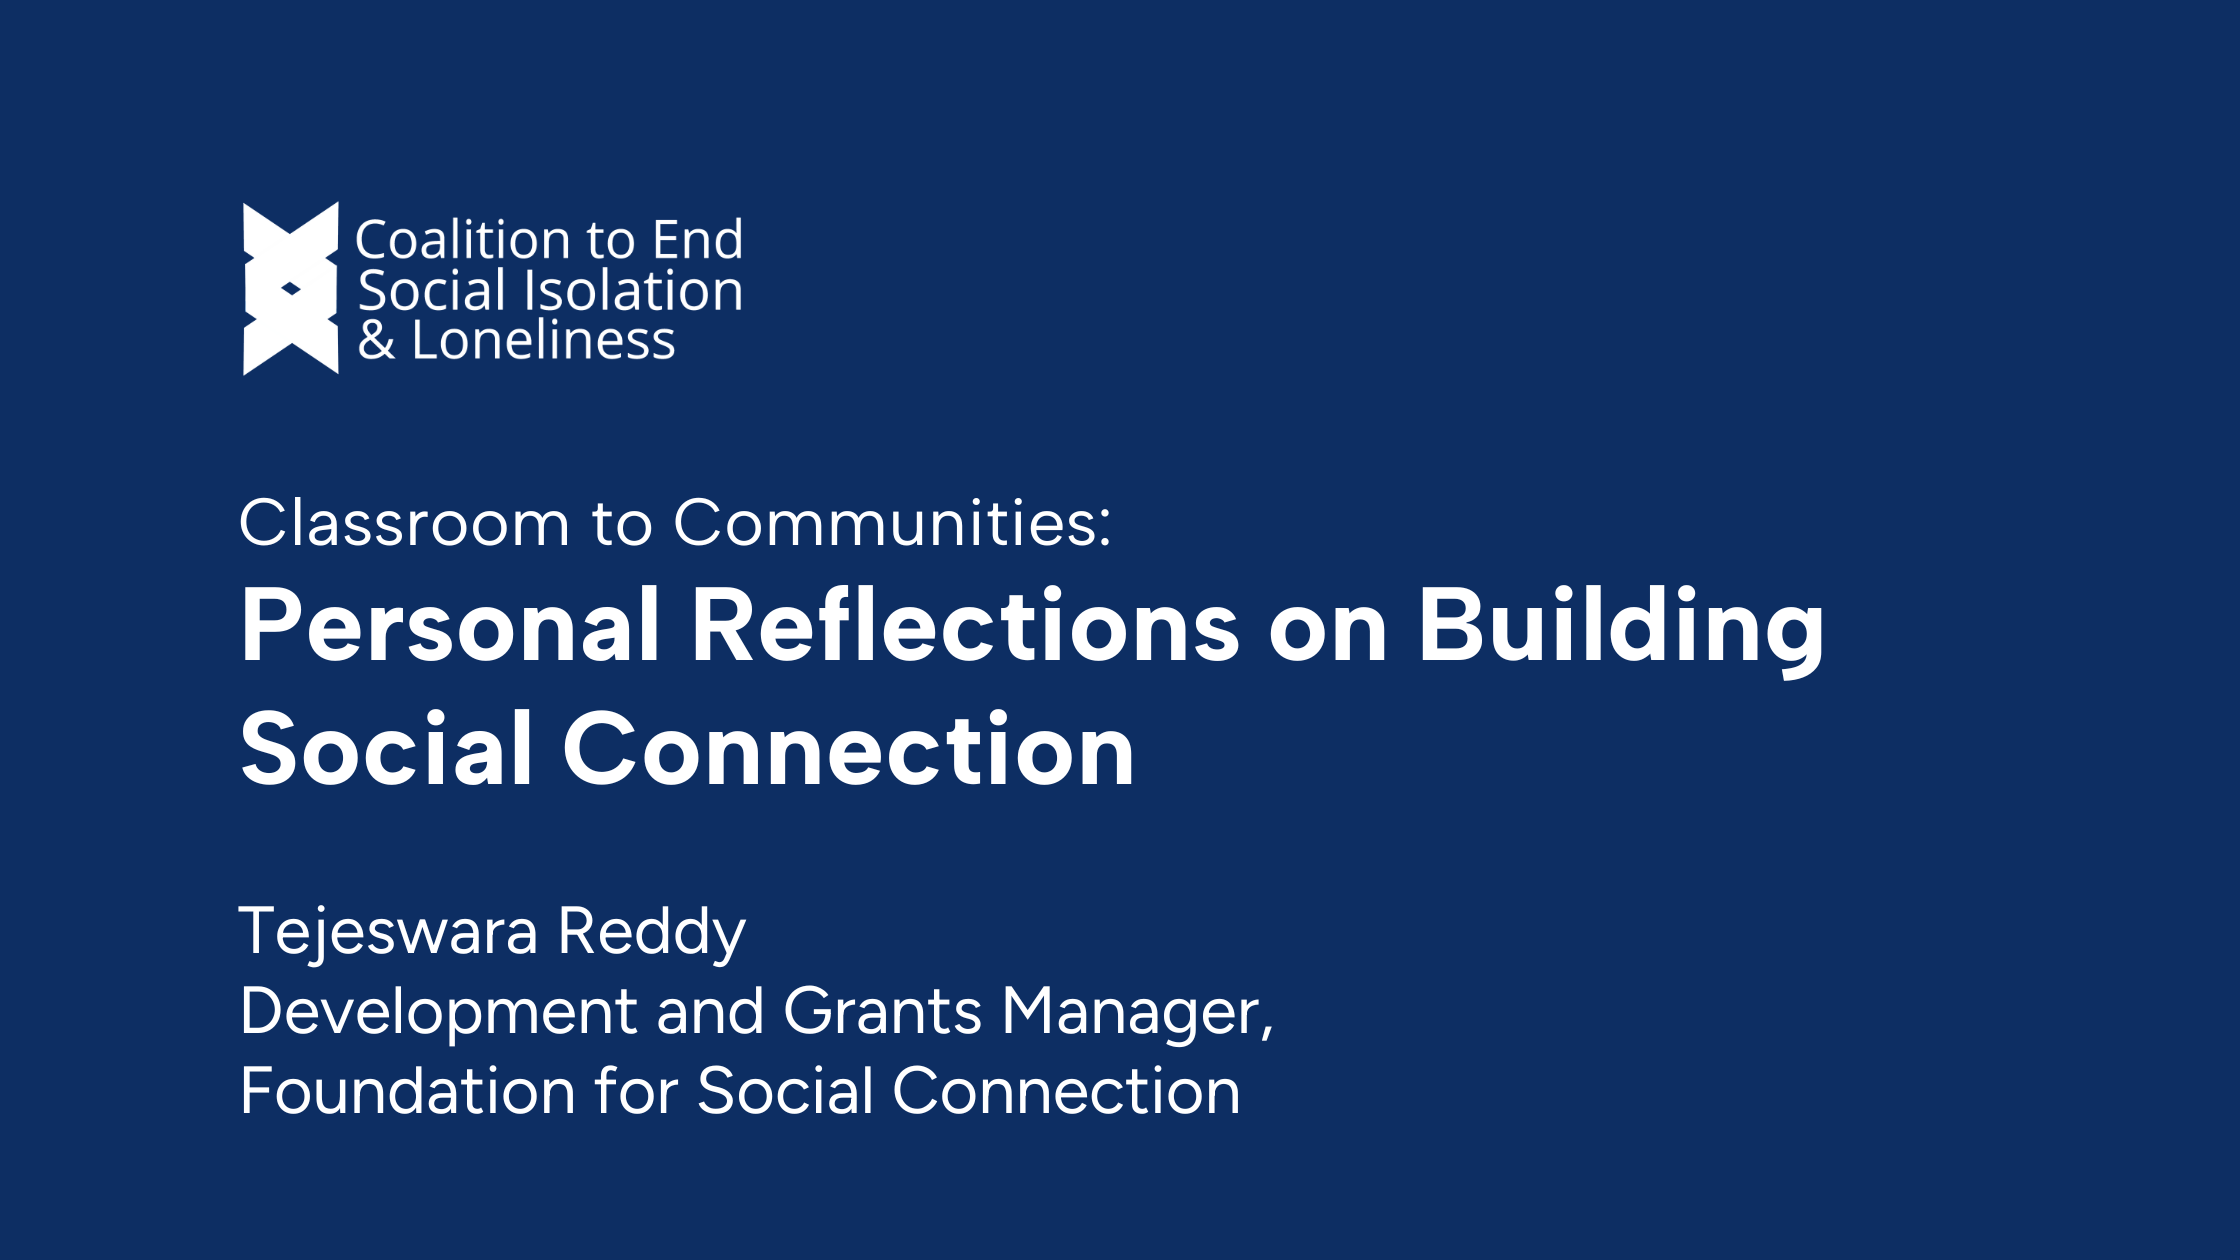 Classroom to Communities: Personal Reflections on Building Social Connection